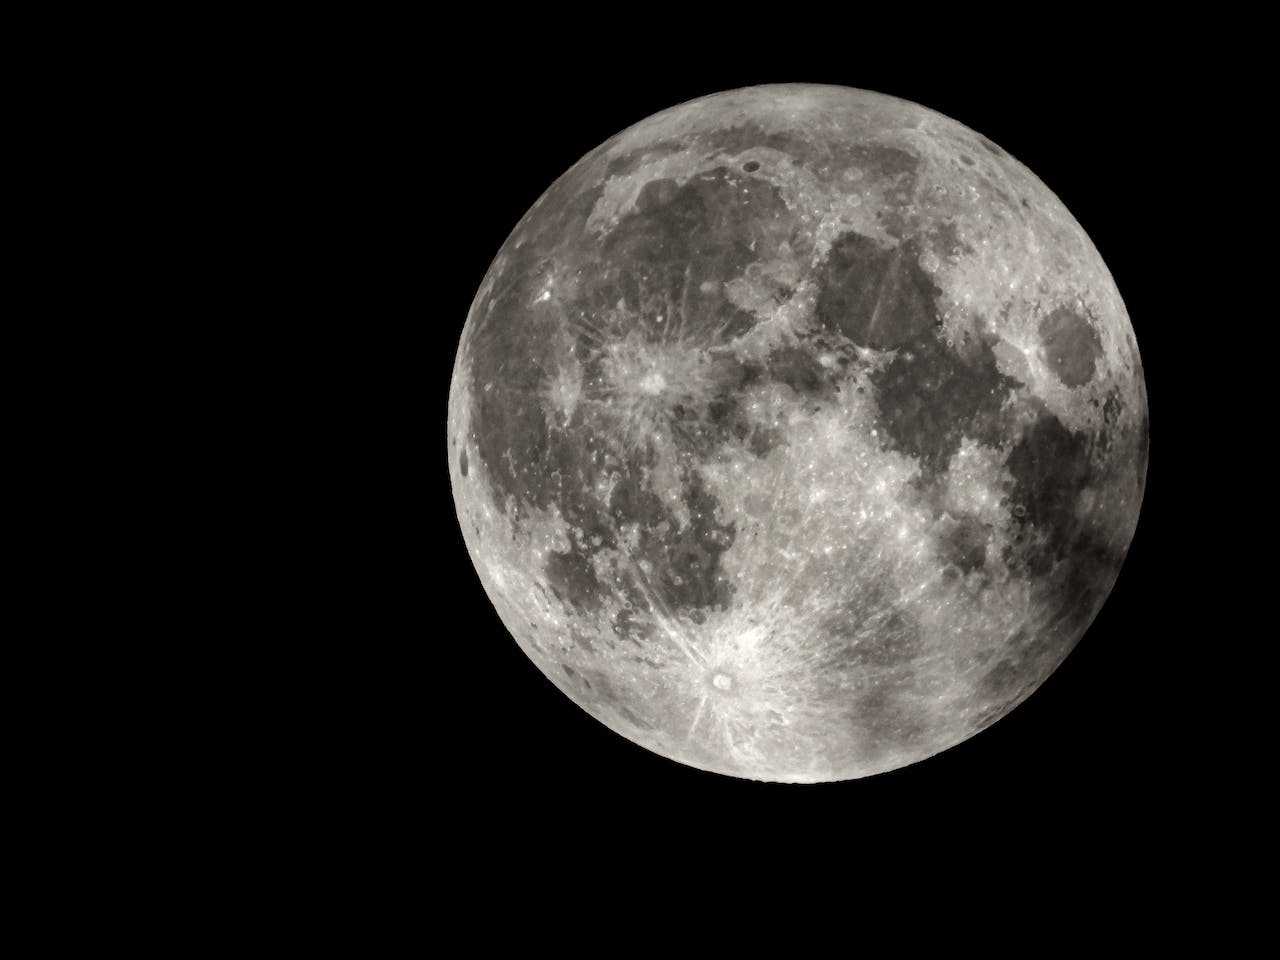 How to photograph the moon: the guide in 5 tips